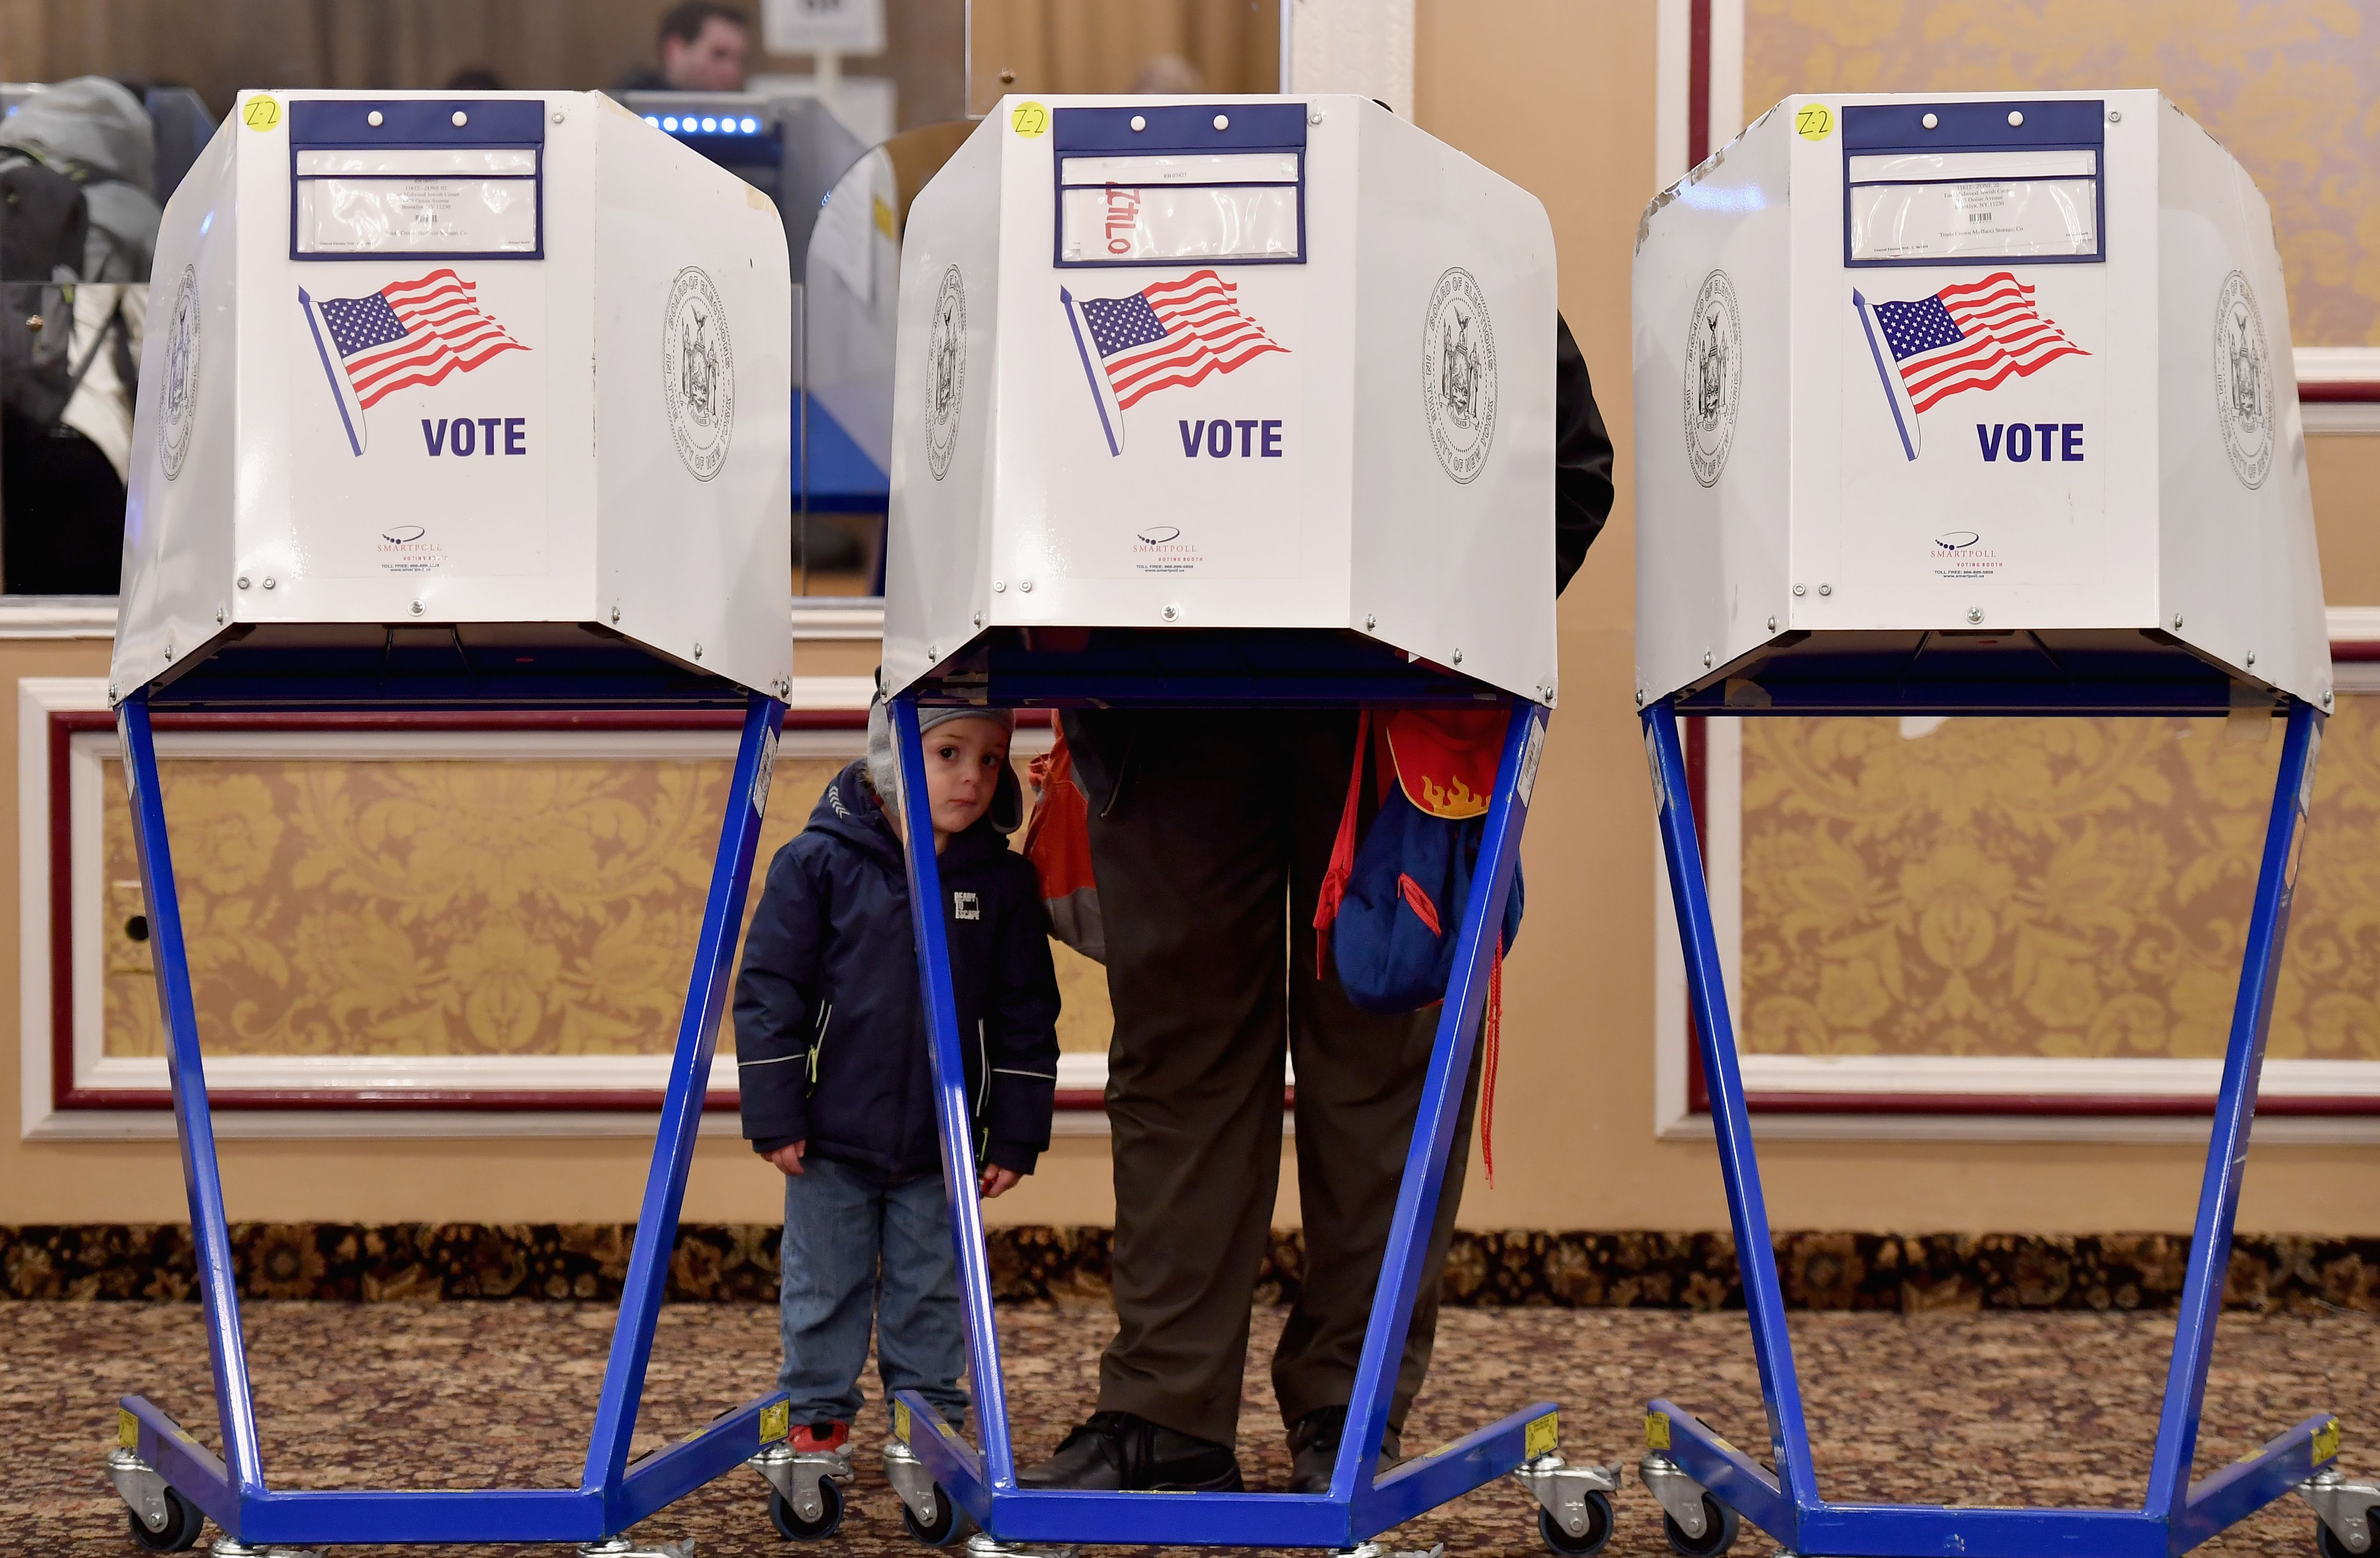 Live Updates: Election Day is here in NY and NJ. Here’s what
you need to know.